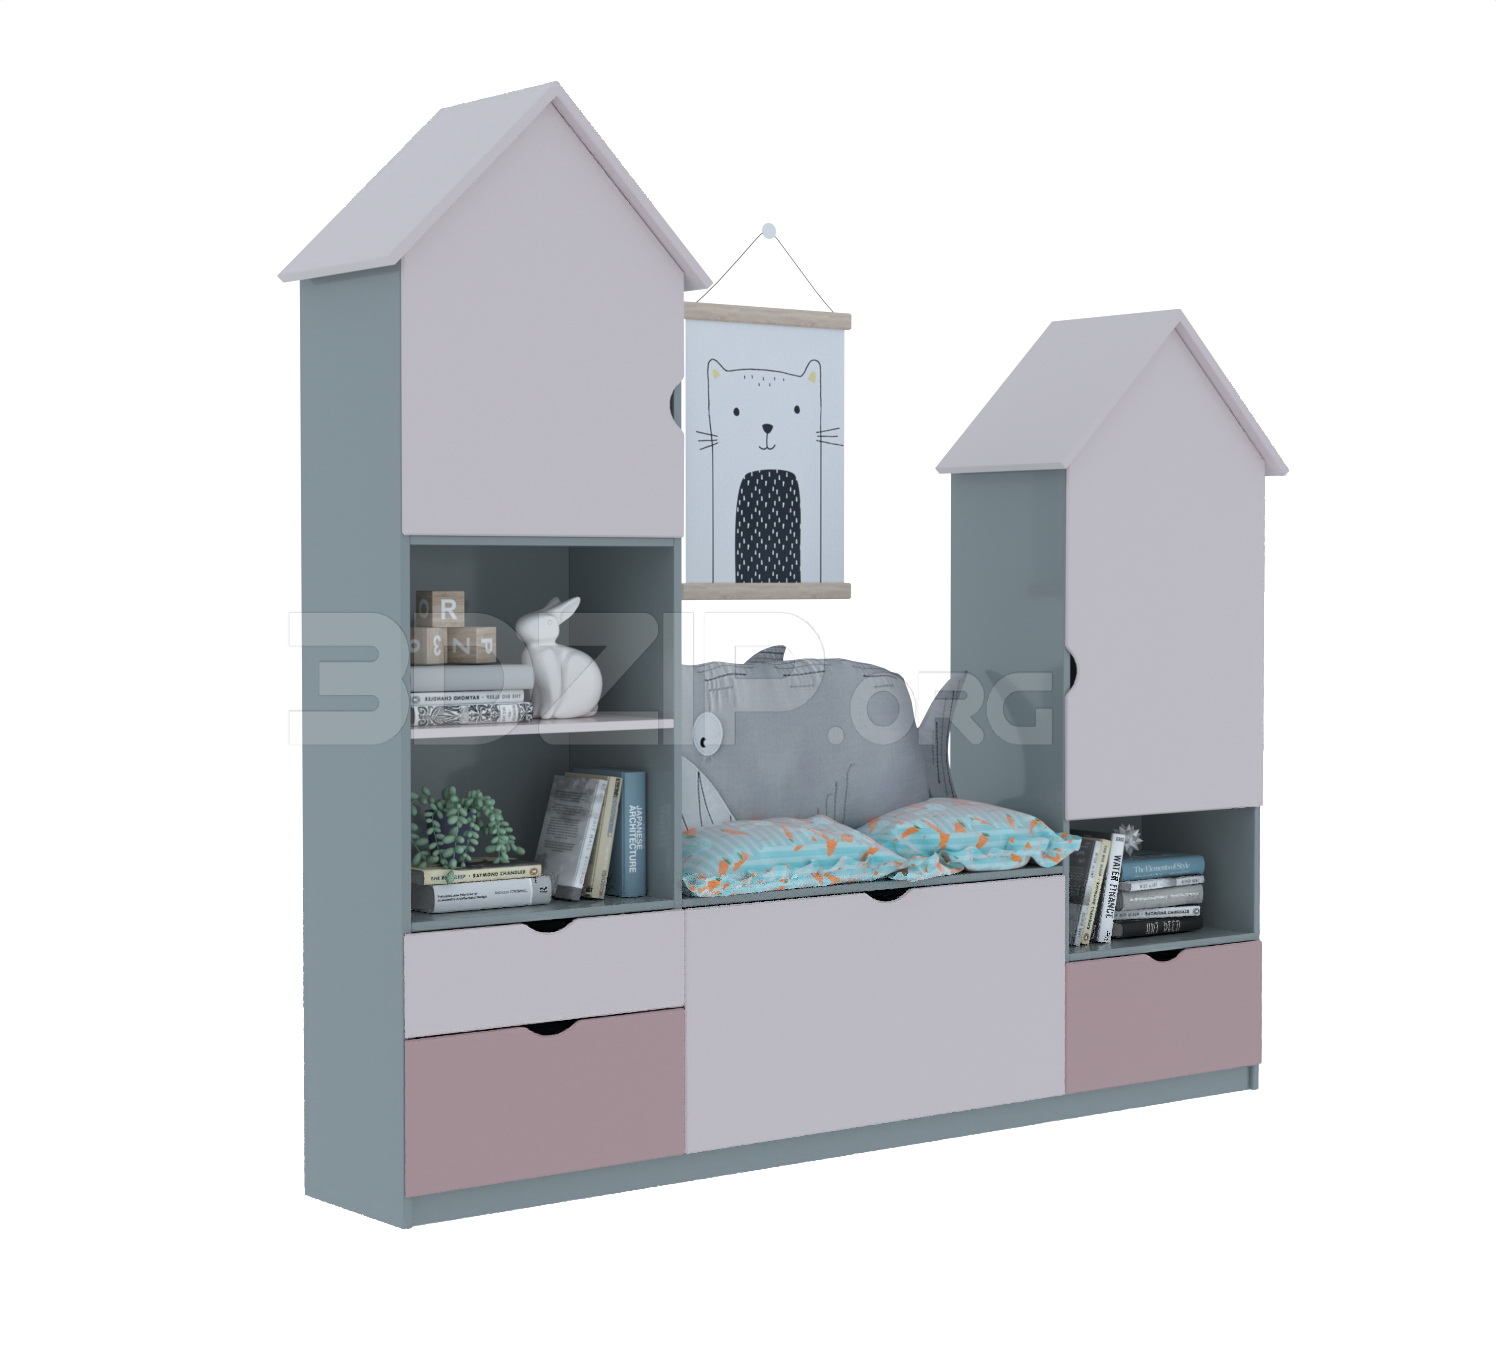 10658. Download Free Display Cabinets Model By Se Arc